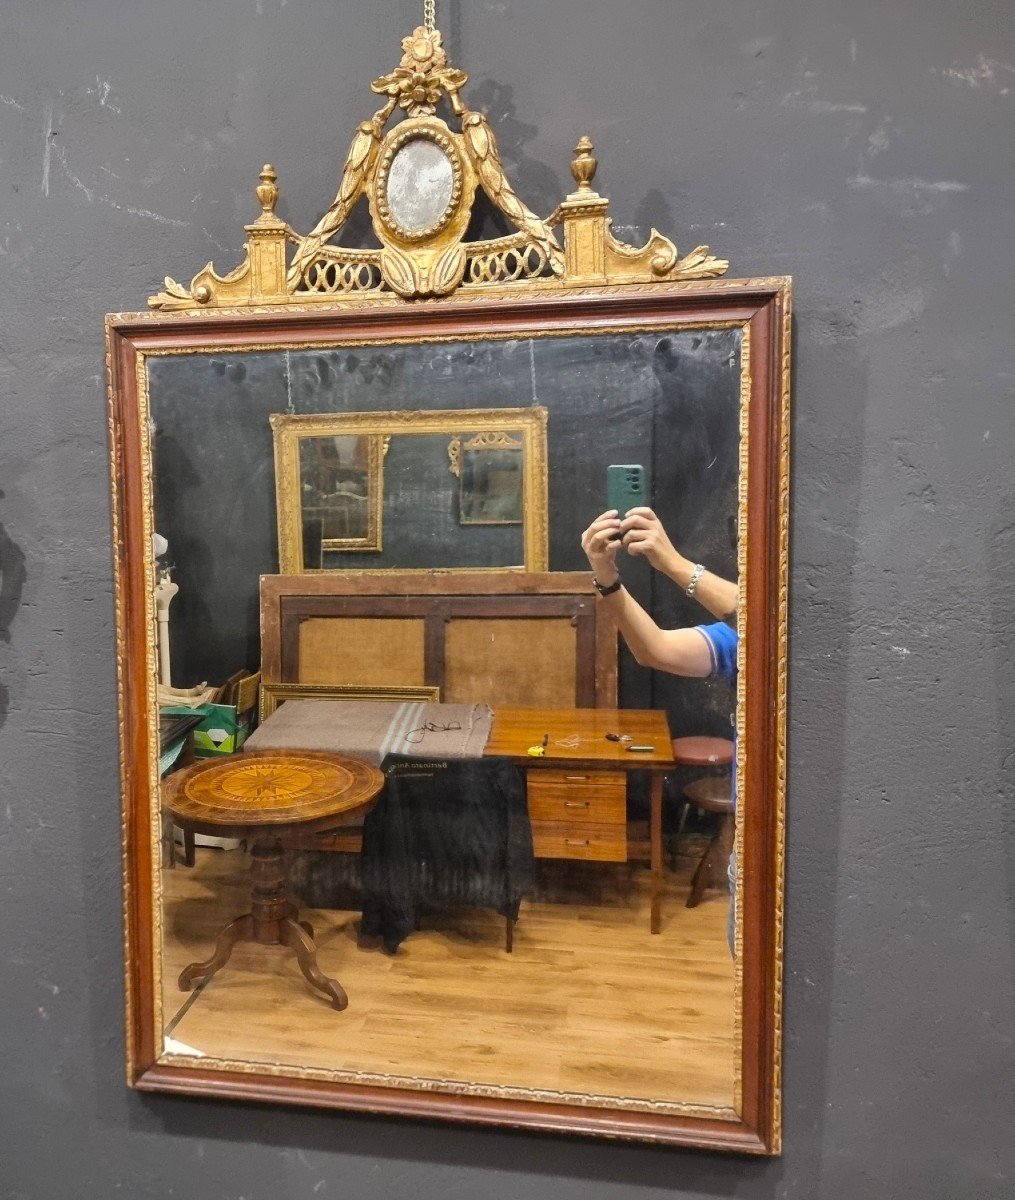 18th Century Mirror Frame In Louis XVI Style With Golden Crest From Venice